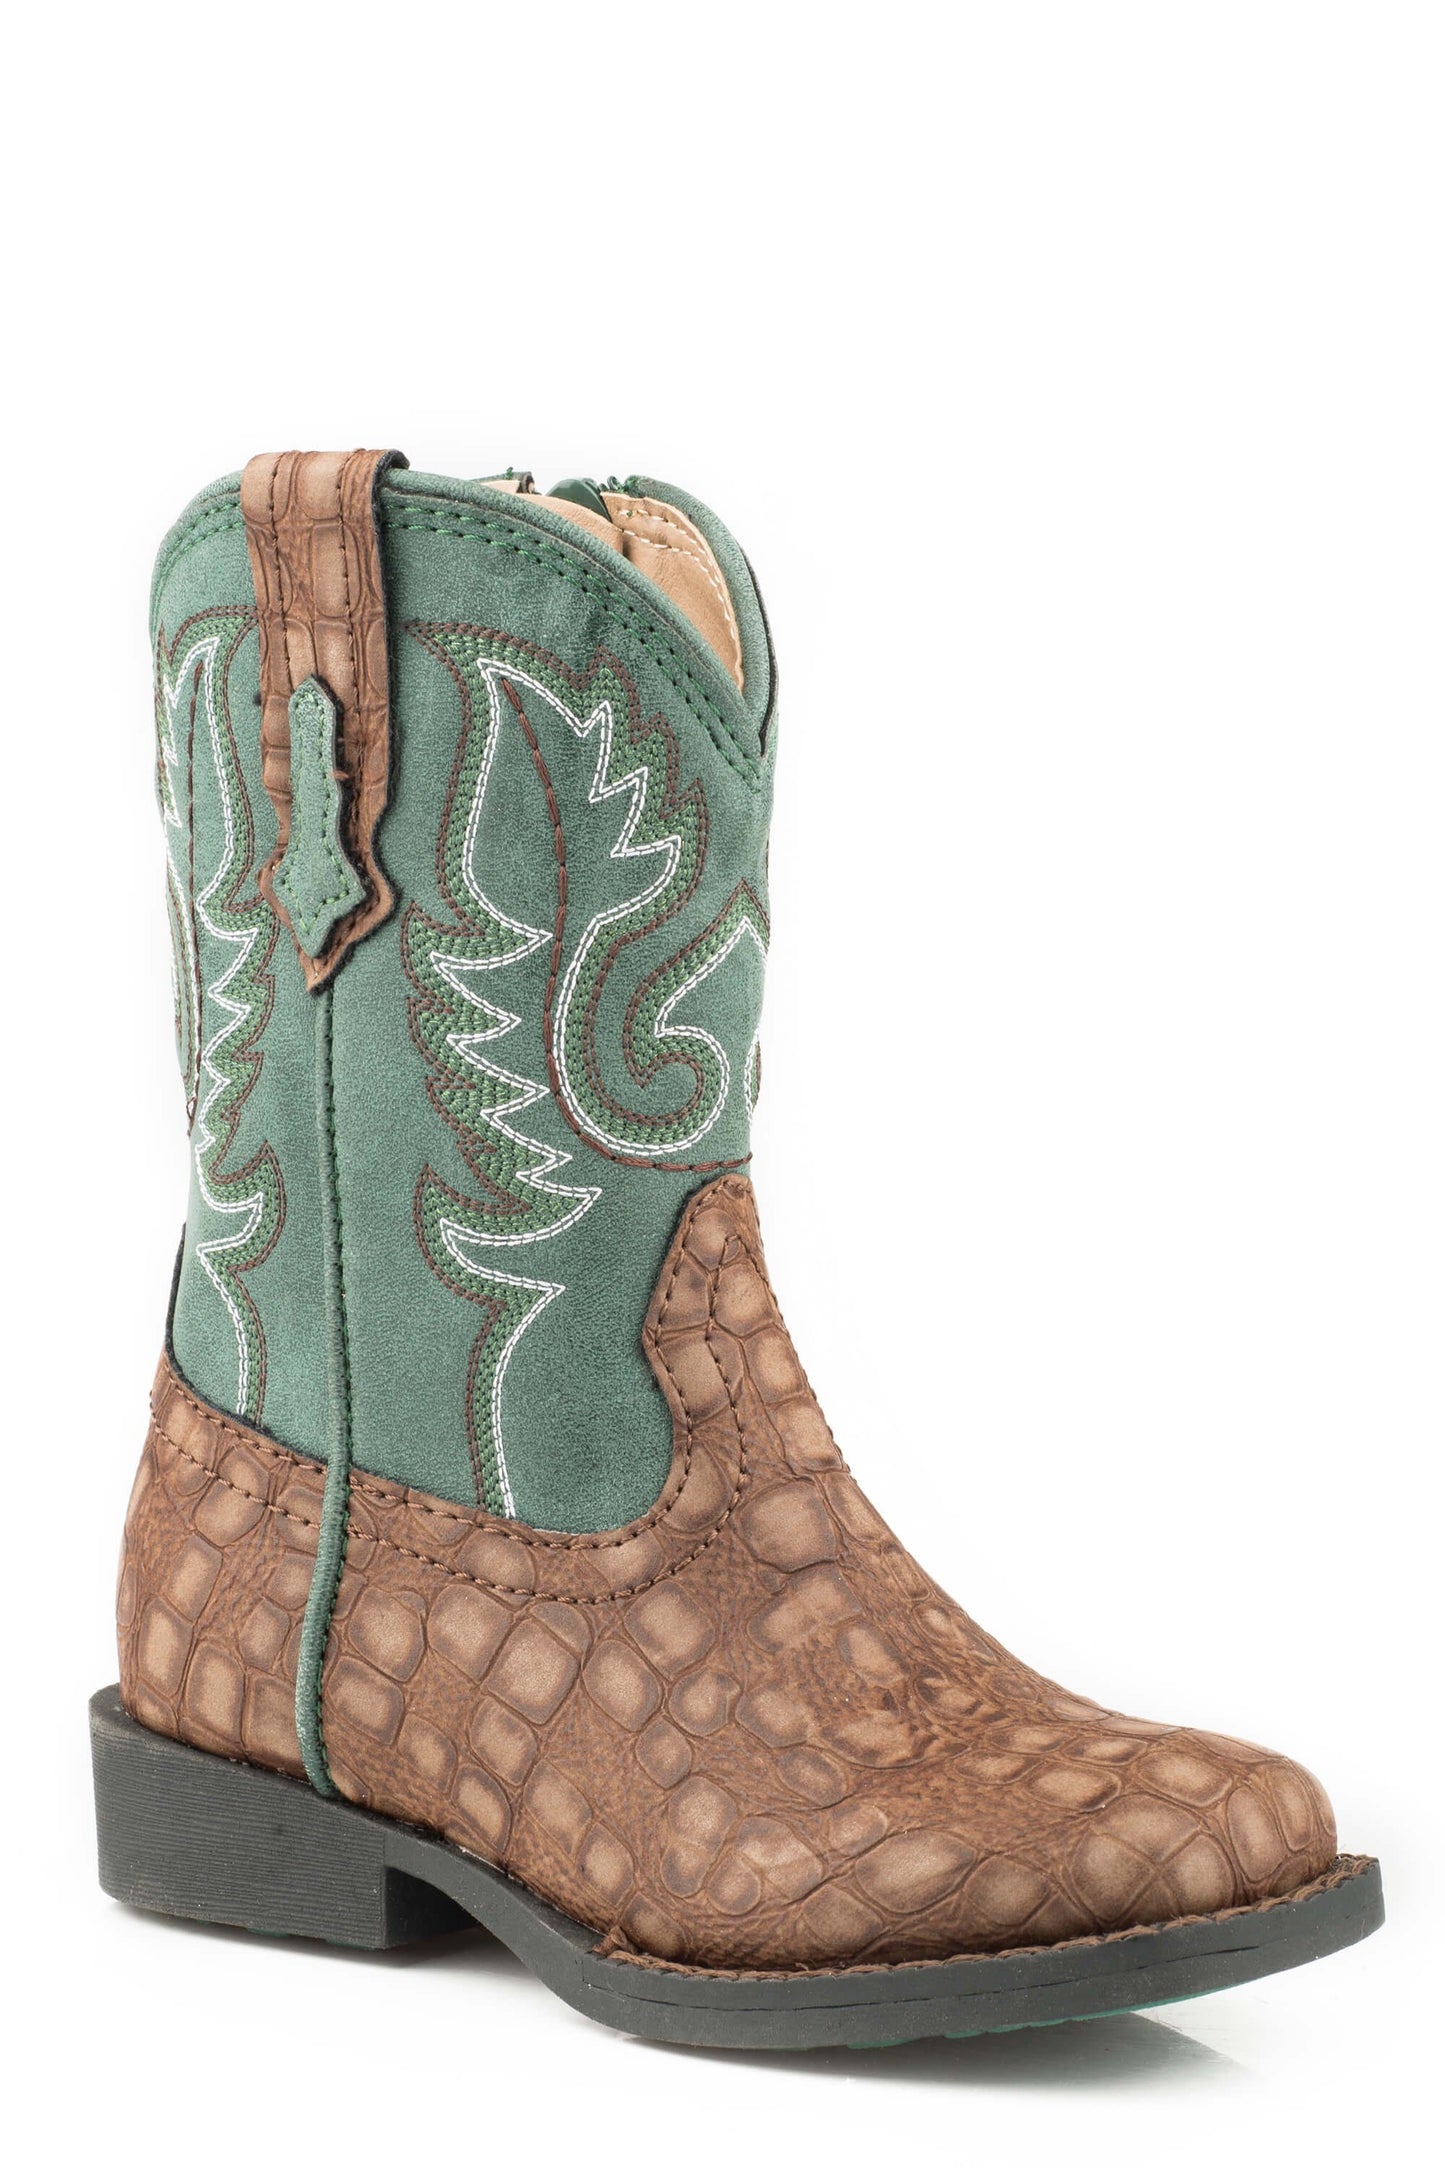 Kid's Roper Toddler Gator Brown and Green Boots - Diamond K Country